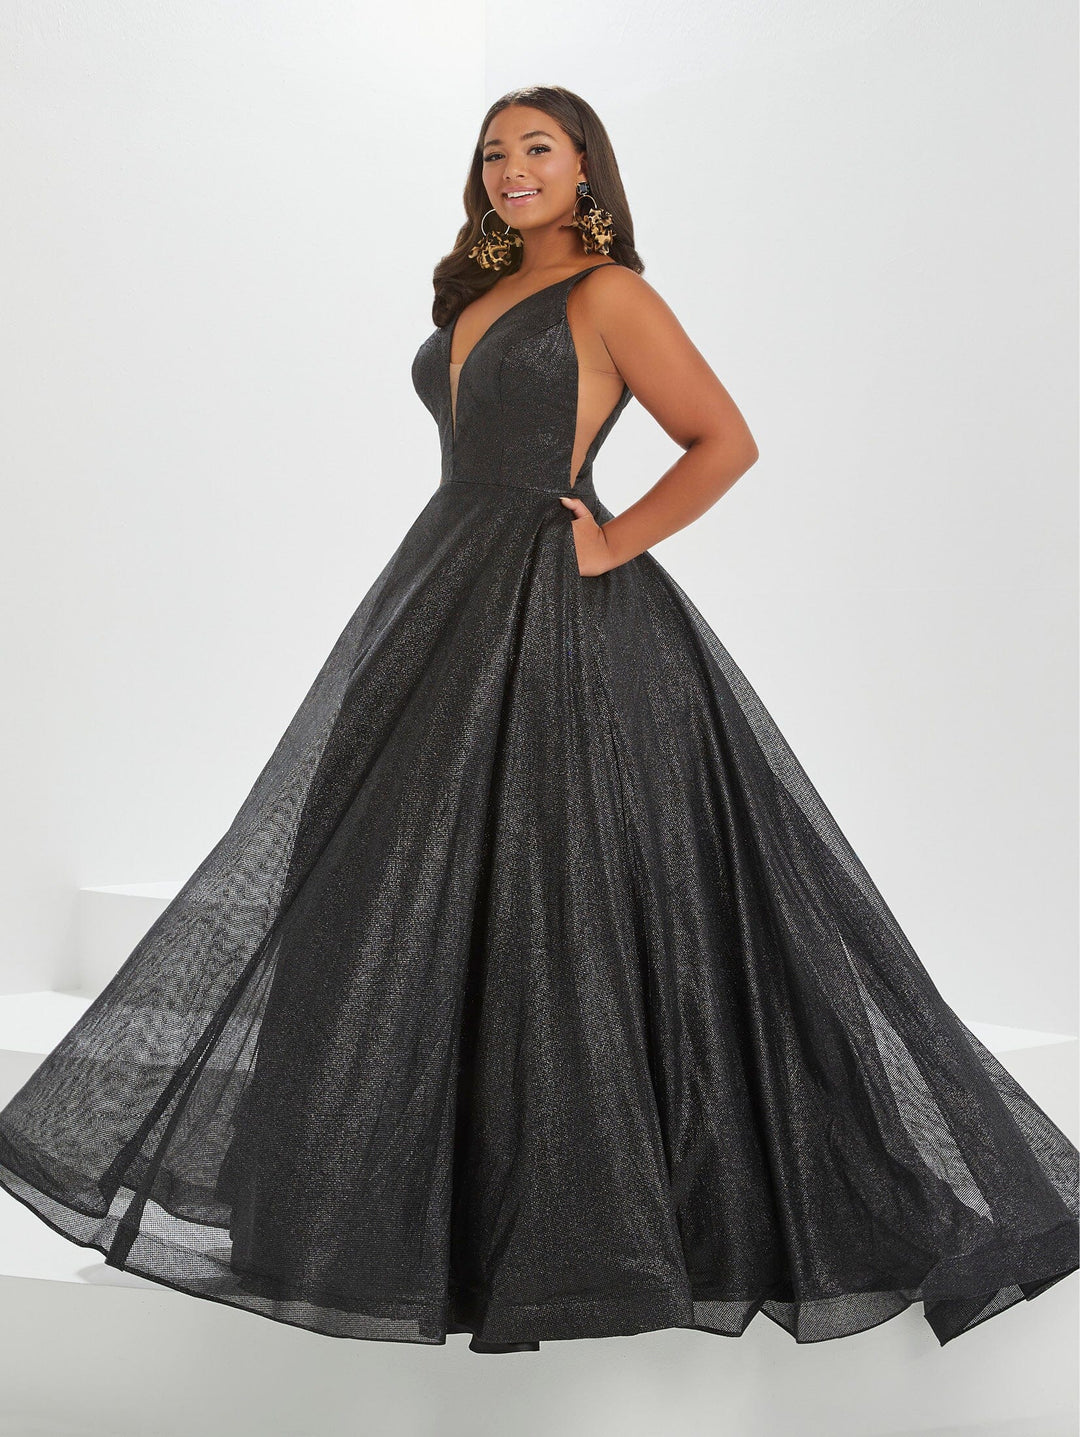 Plus Size Sleeveless Glitter Gown by Tiffany Designs 16041